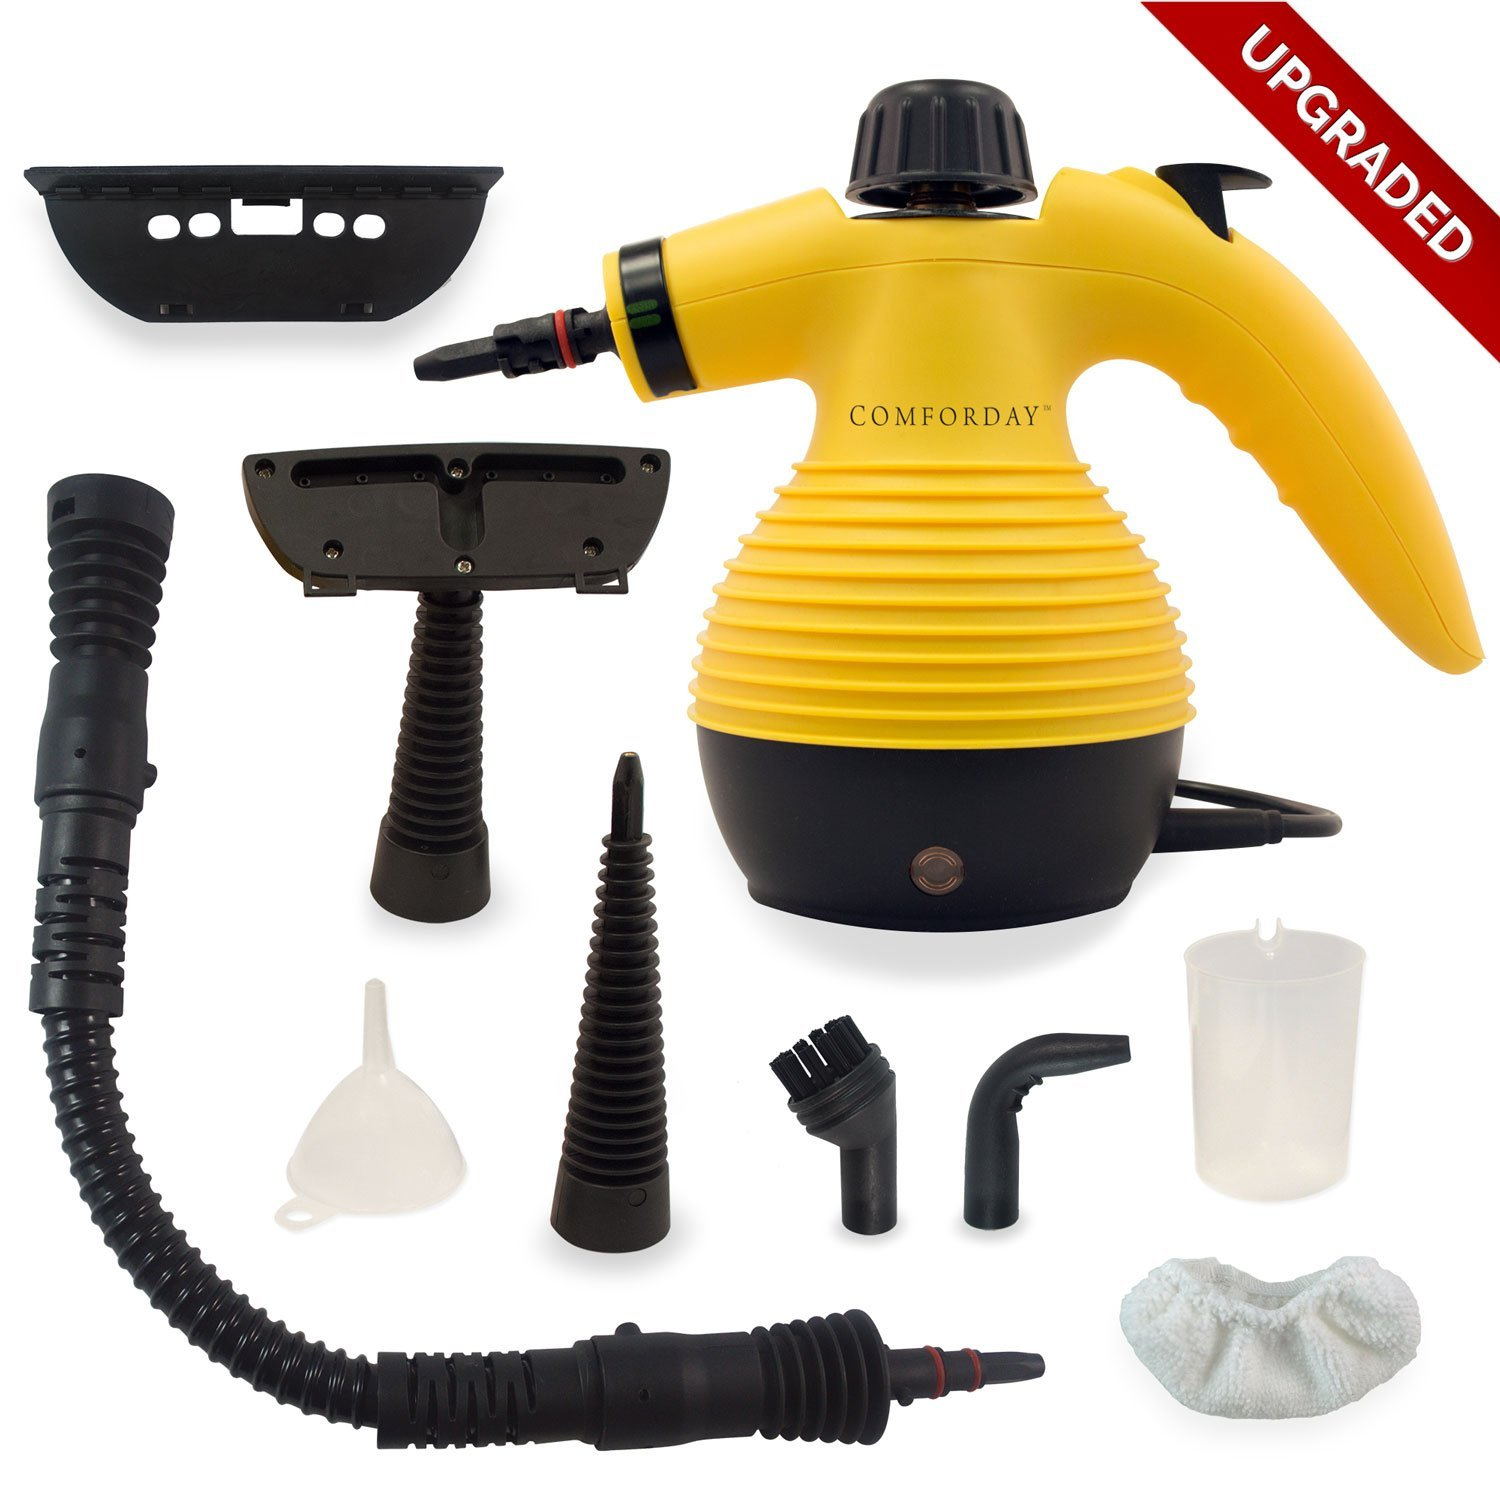 ALL IN ONE Comforday Handheld Steam Cleaner Just $28.49!